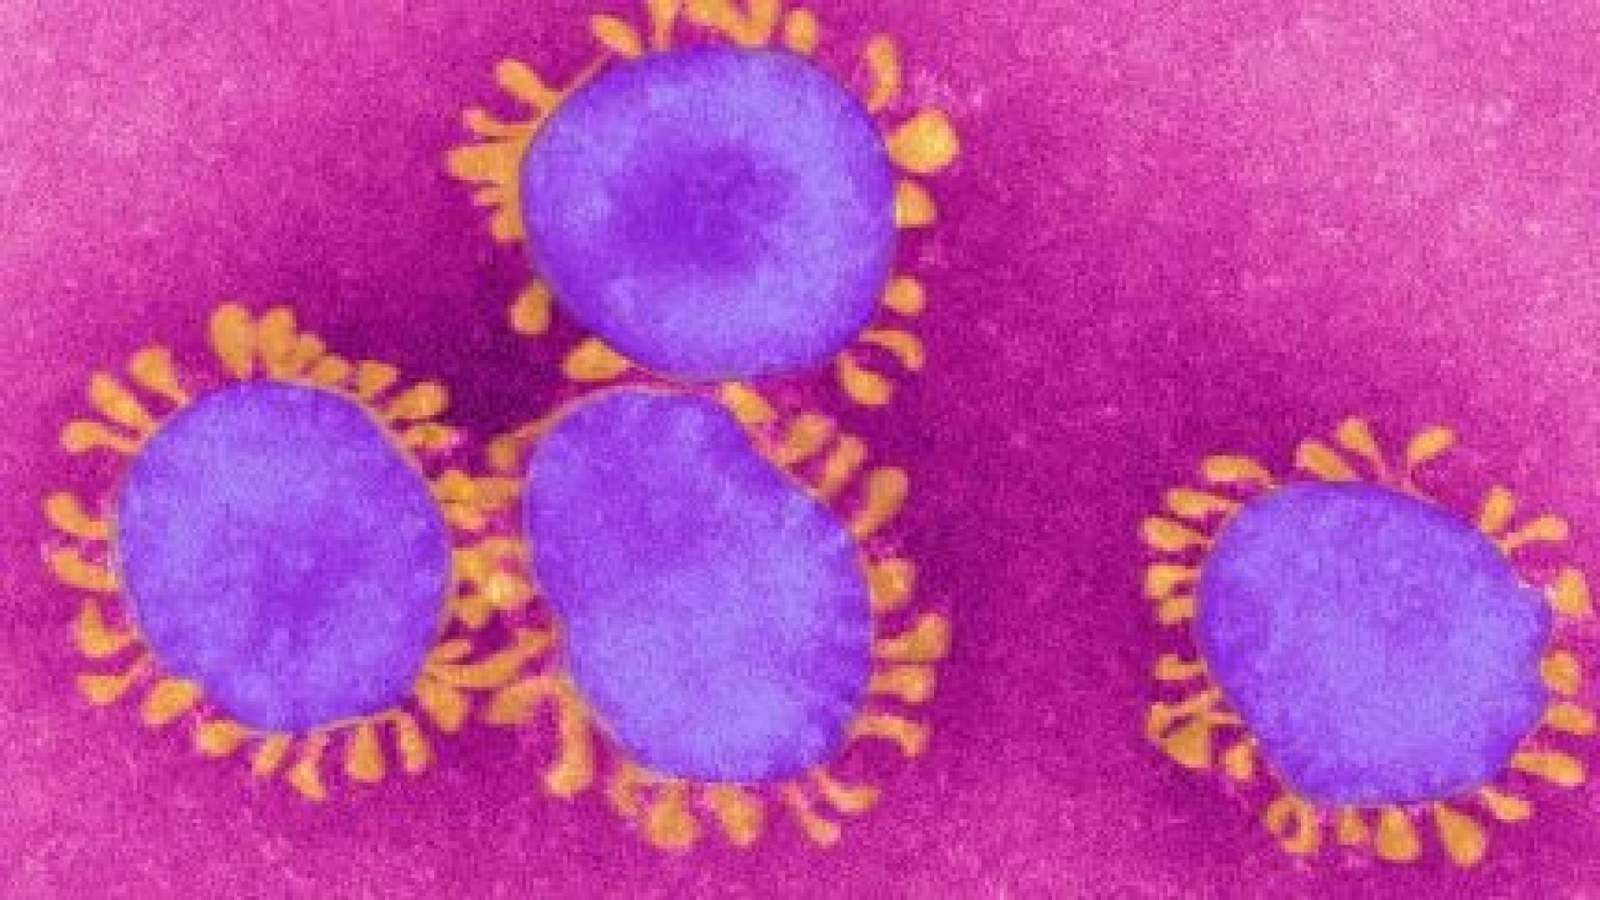 Coronavirus may not be mutating, but experts say there is still potential for danger